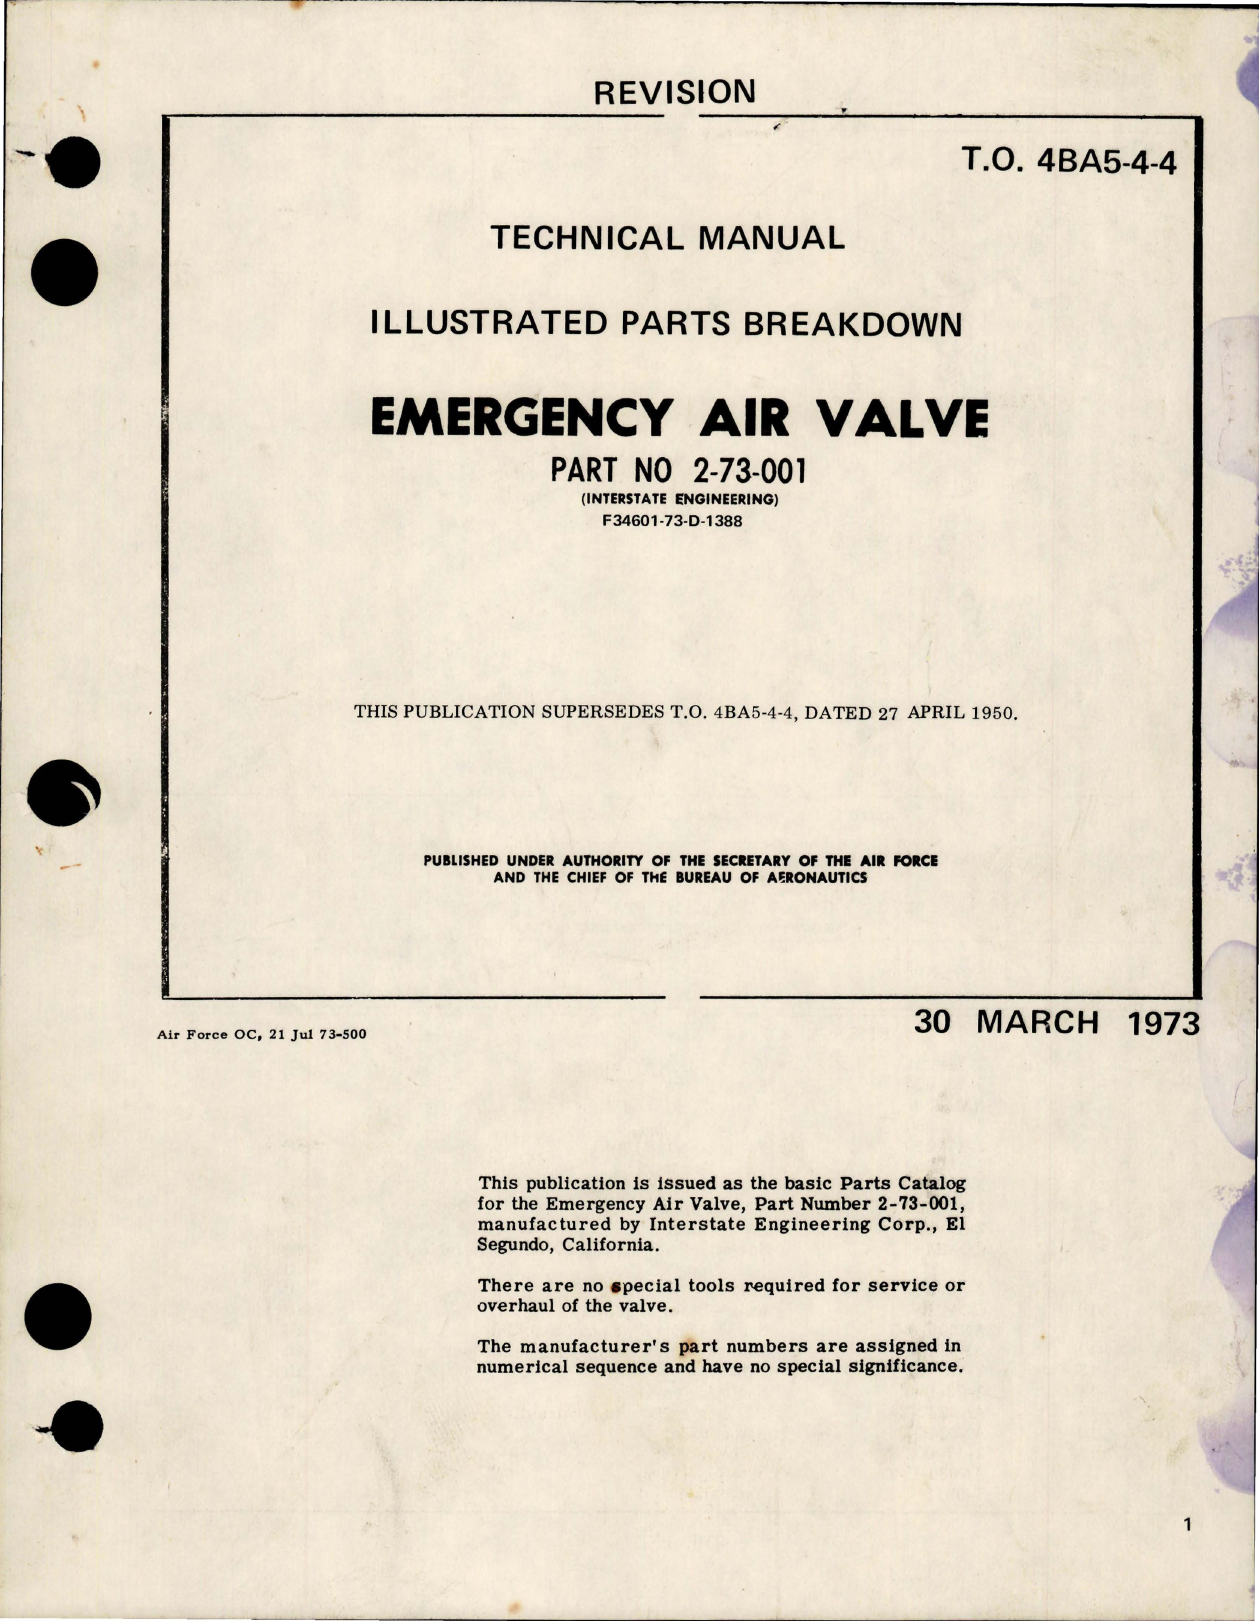 Sample page 1 from AirCorps Library document: Illustrated Parts Breakdown for Emergency Air Valve - Part 2-73-001 